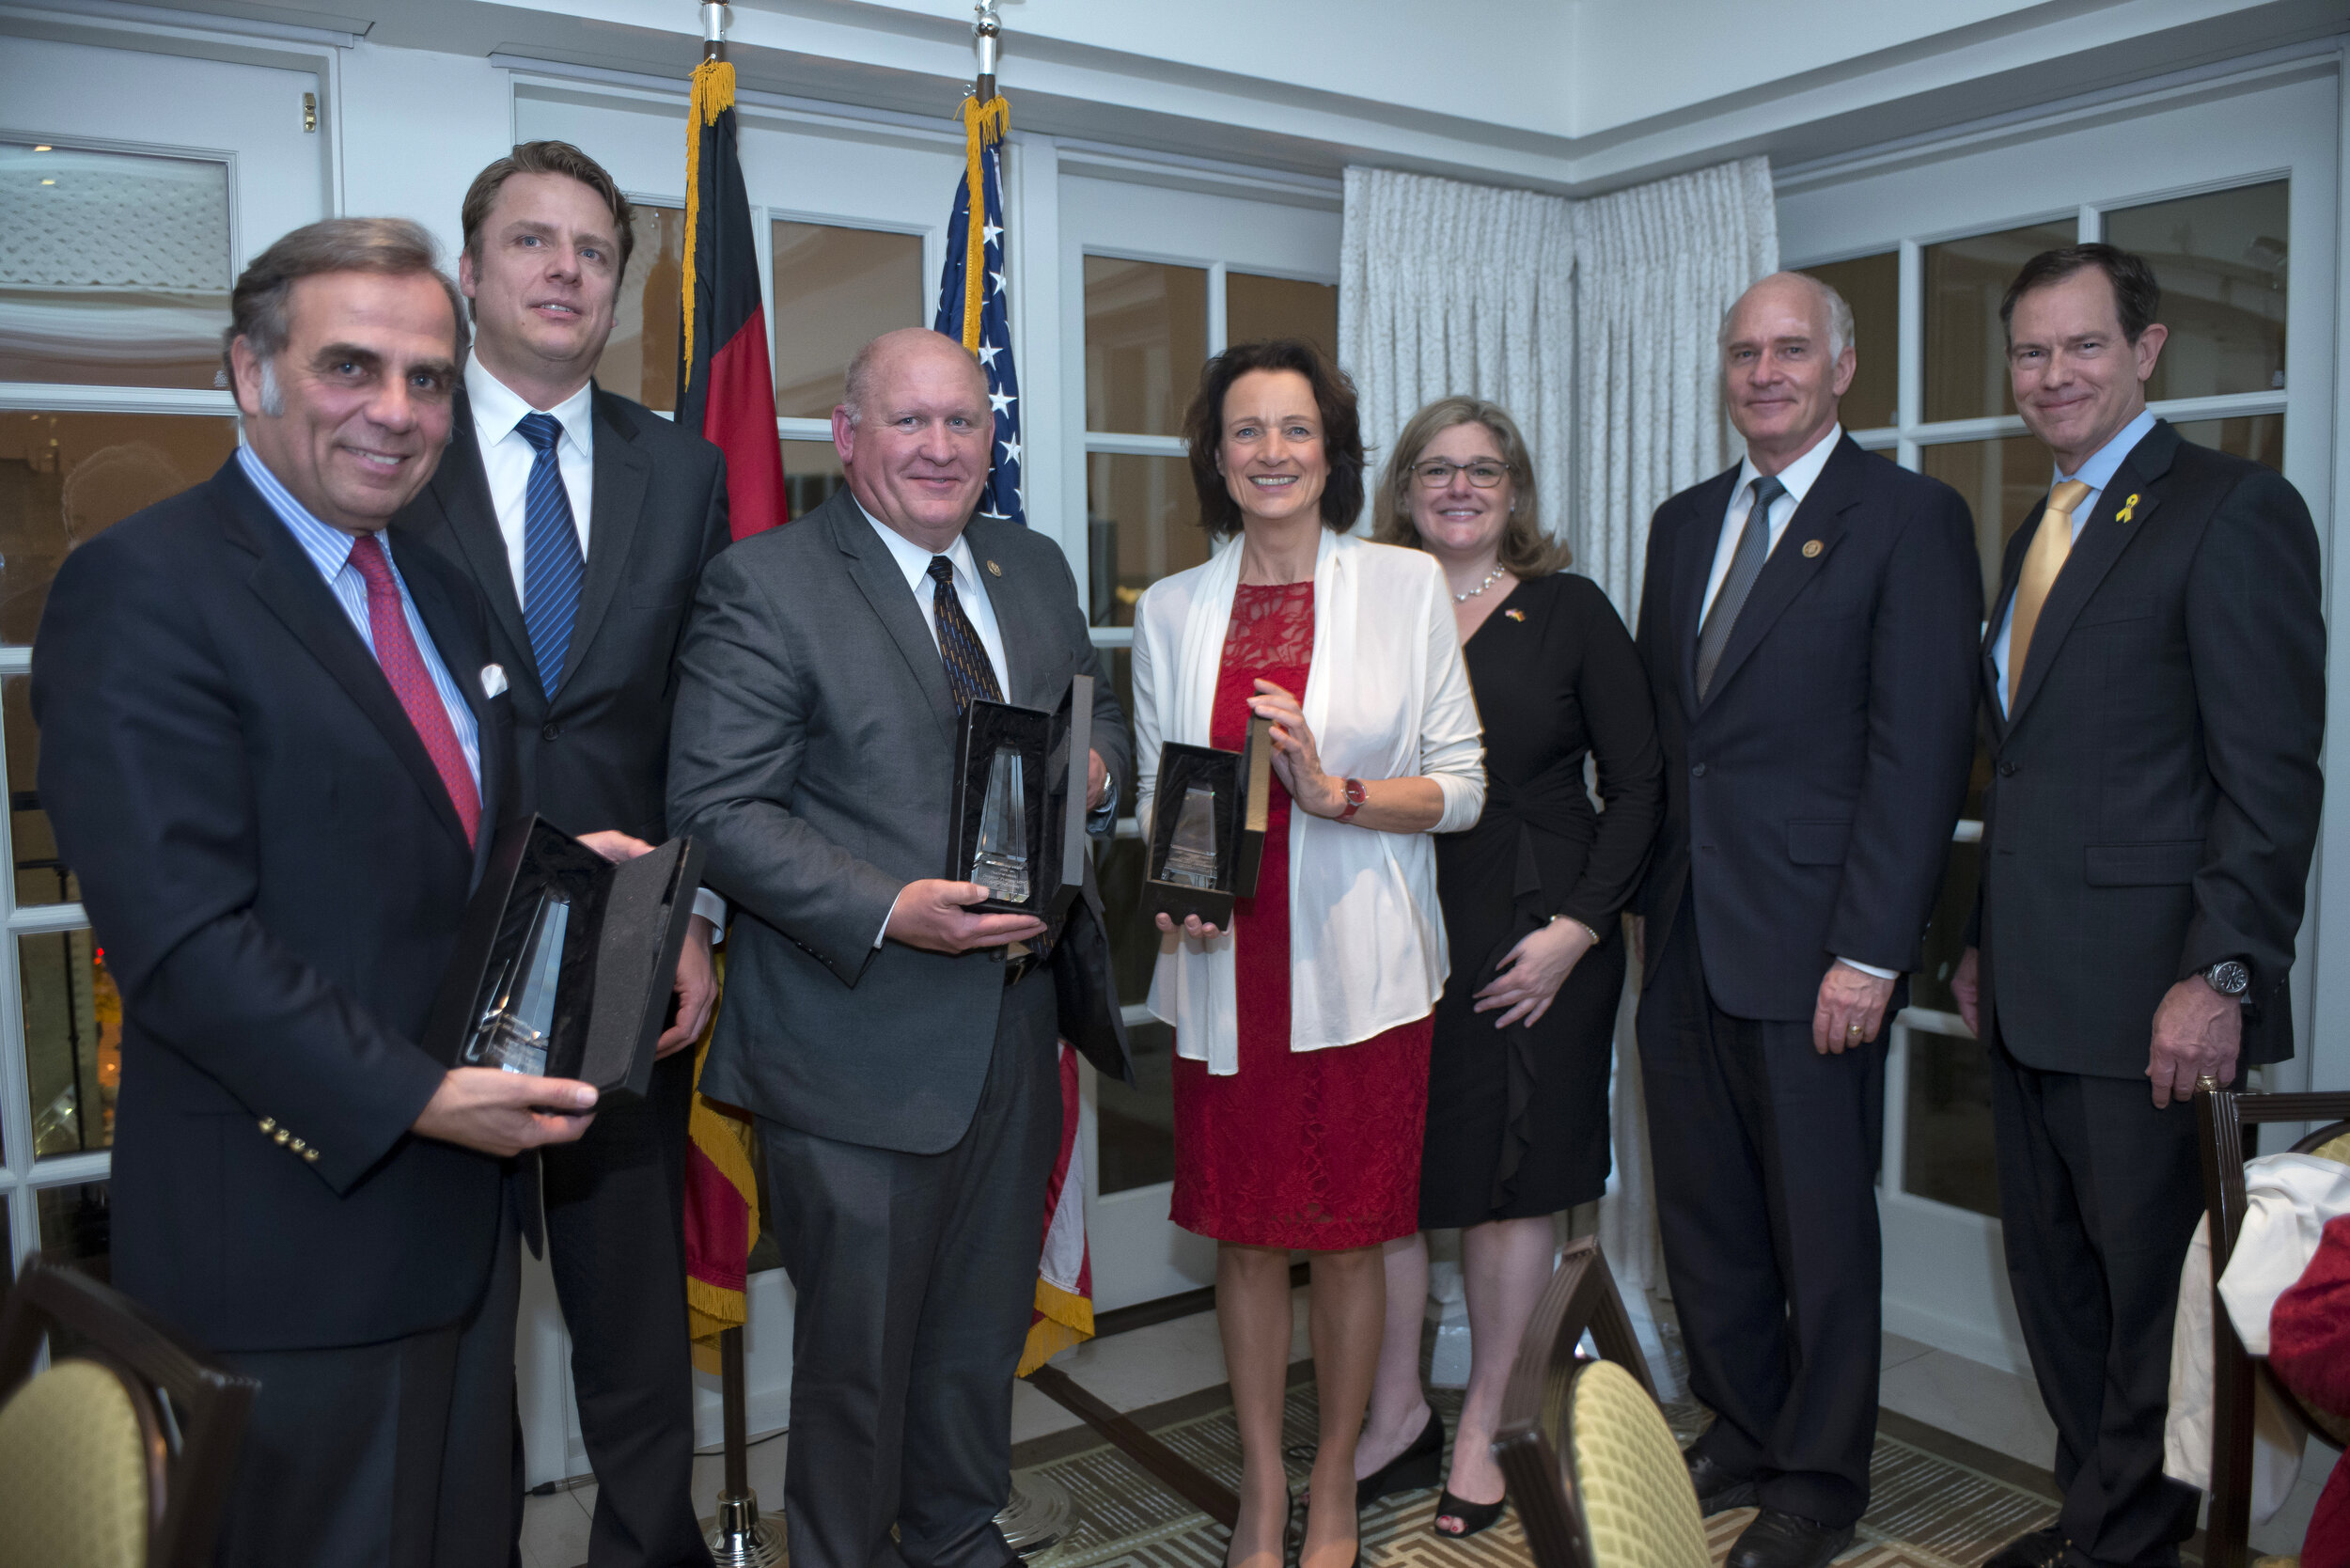  2016 Leadership Award Recipients, from left: BMW, accepted by Ludwig Willisch, Rep. Glenn ‘GT’ Thompson, and Dagmar Freitag, MP. 